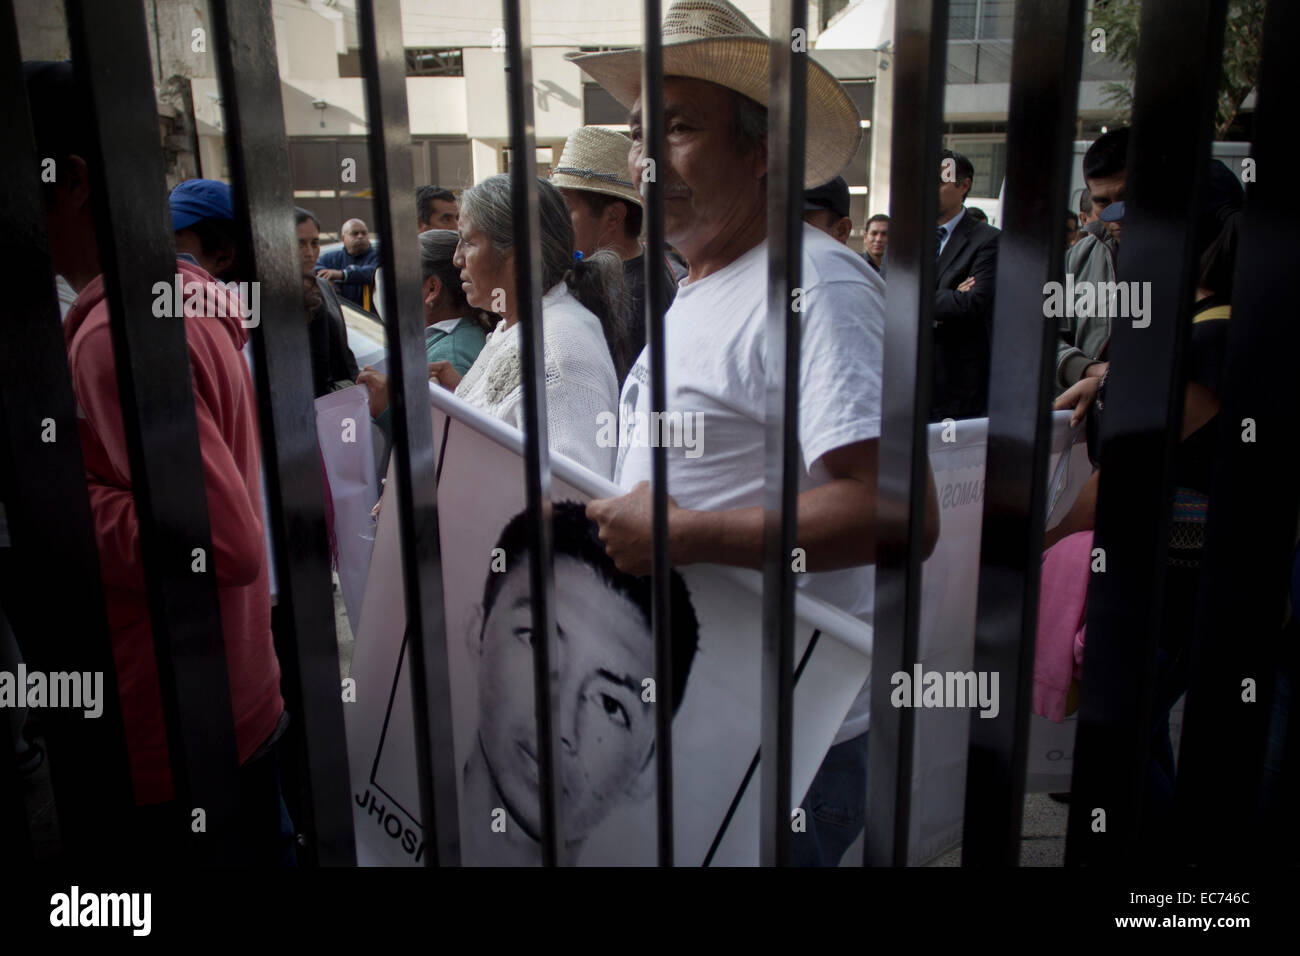 Mexico City, Mexico. 9th Dec, 2014. Family members of the students of the Normal Rural School of Ayotzinapa that went missing in Iguala, Guerrero, arrive for a meeting in the Republic's Senate, in Mexico City, capital of Mexico, on Dec. 9, 2014. According to local press, the family members, through a document, asked the Senate to demand the federal authorities to accelerate the investigation of the search of their offspring. © Alejandro Ayala/Xinhua/Alamy Live News Stock Photo